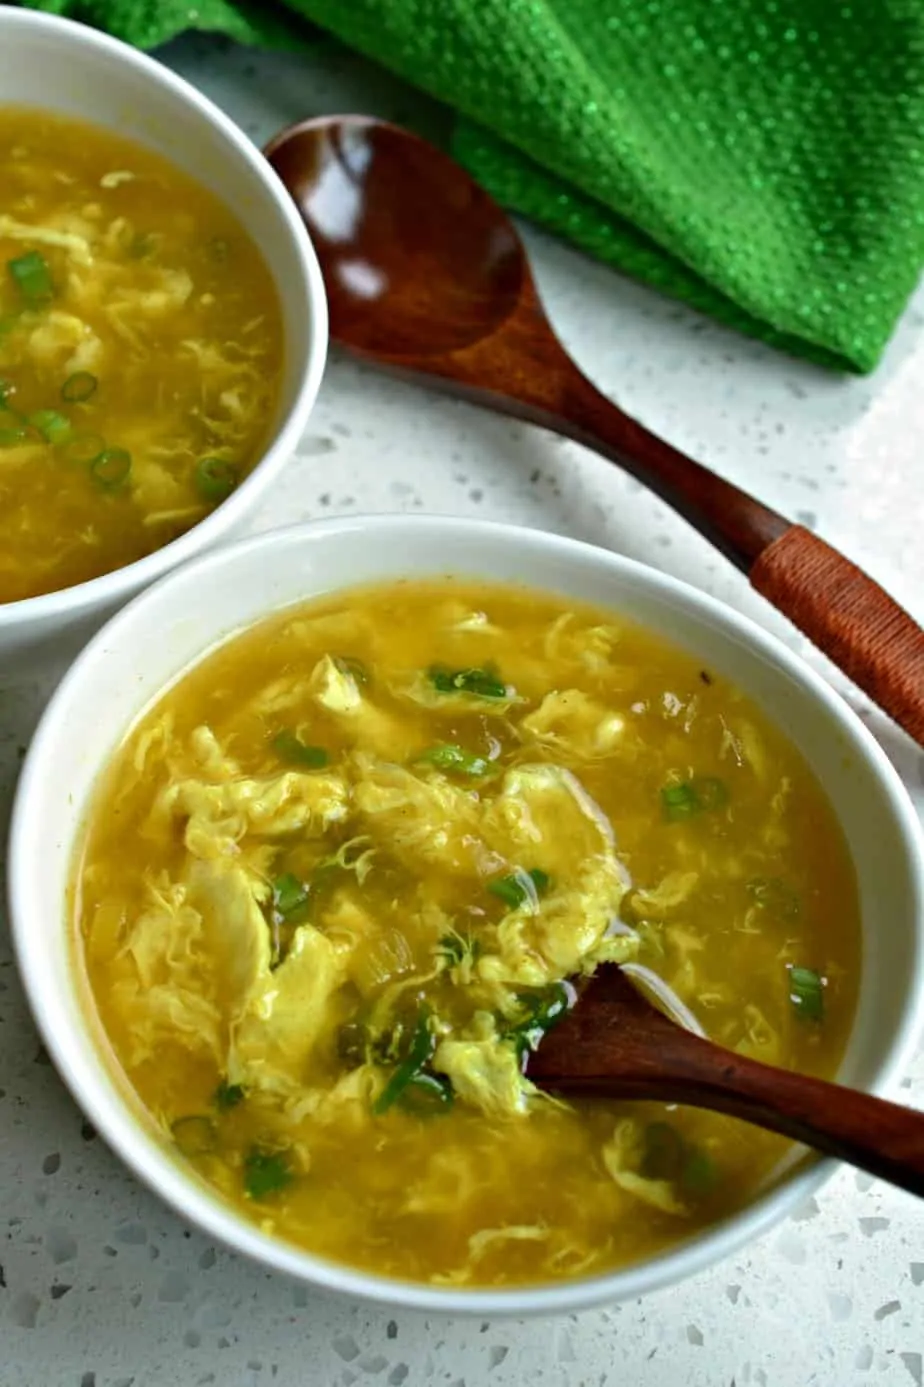 This Egg Drop Soup is made with all natural ingredients and without artificial flavors or colors.